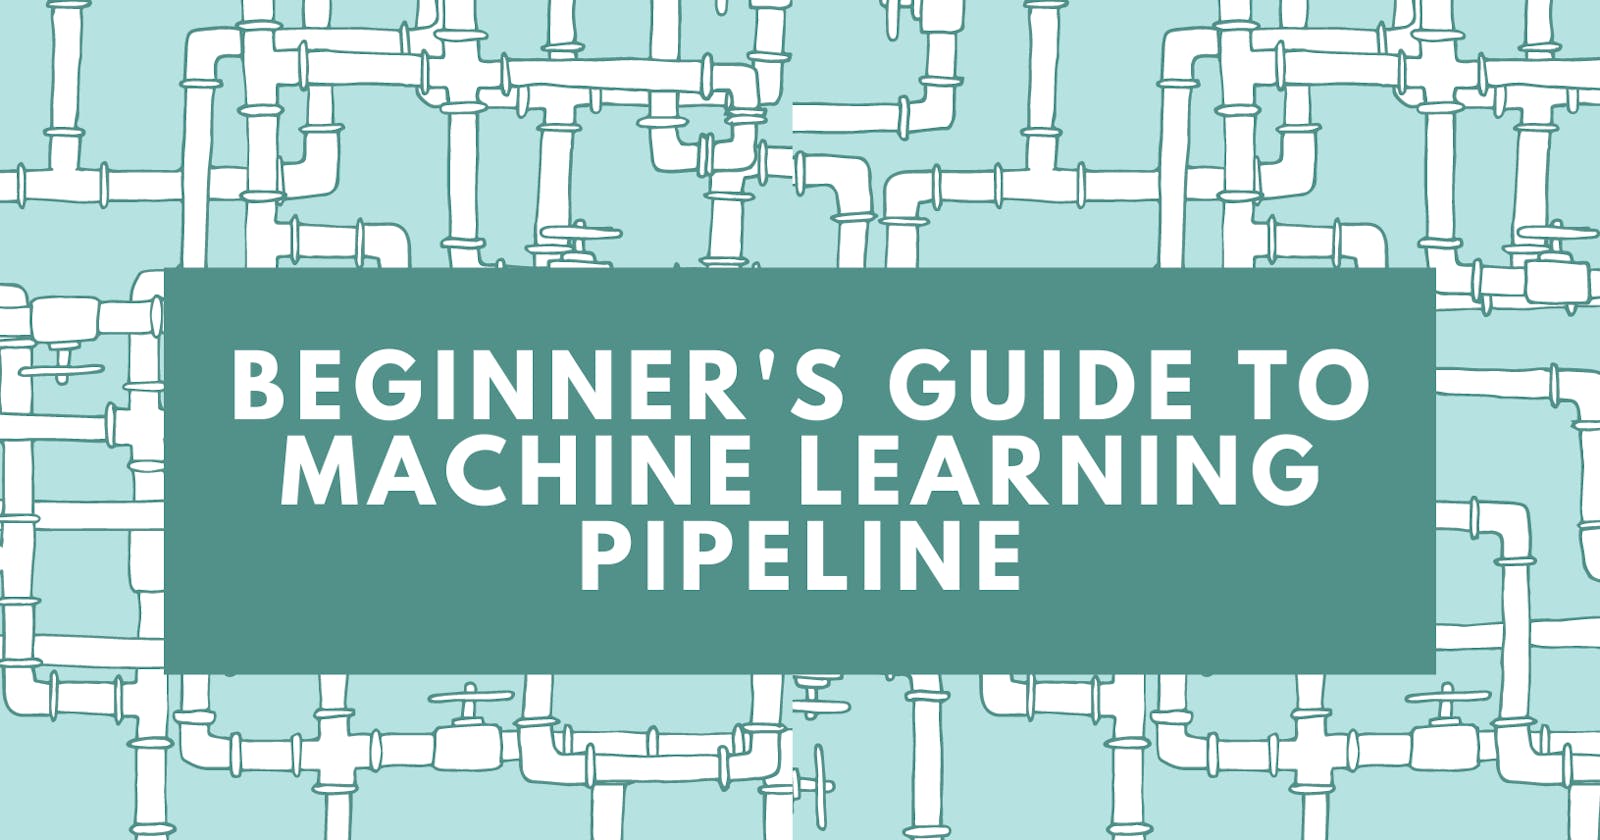 A Beginner's Guide to the Machine Learning Pipeline